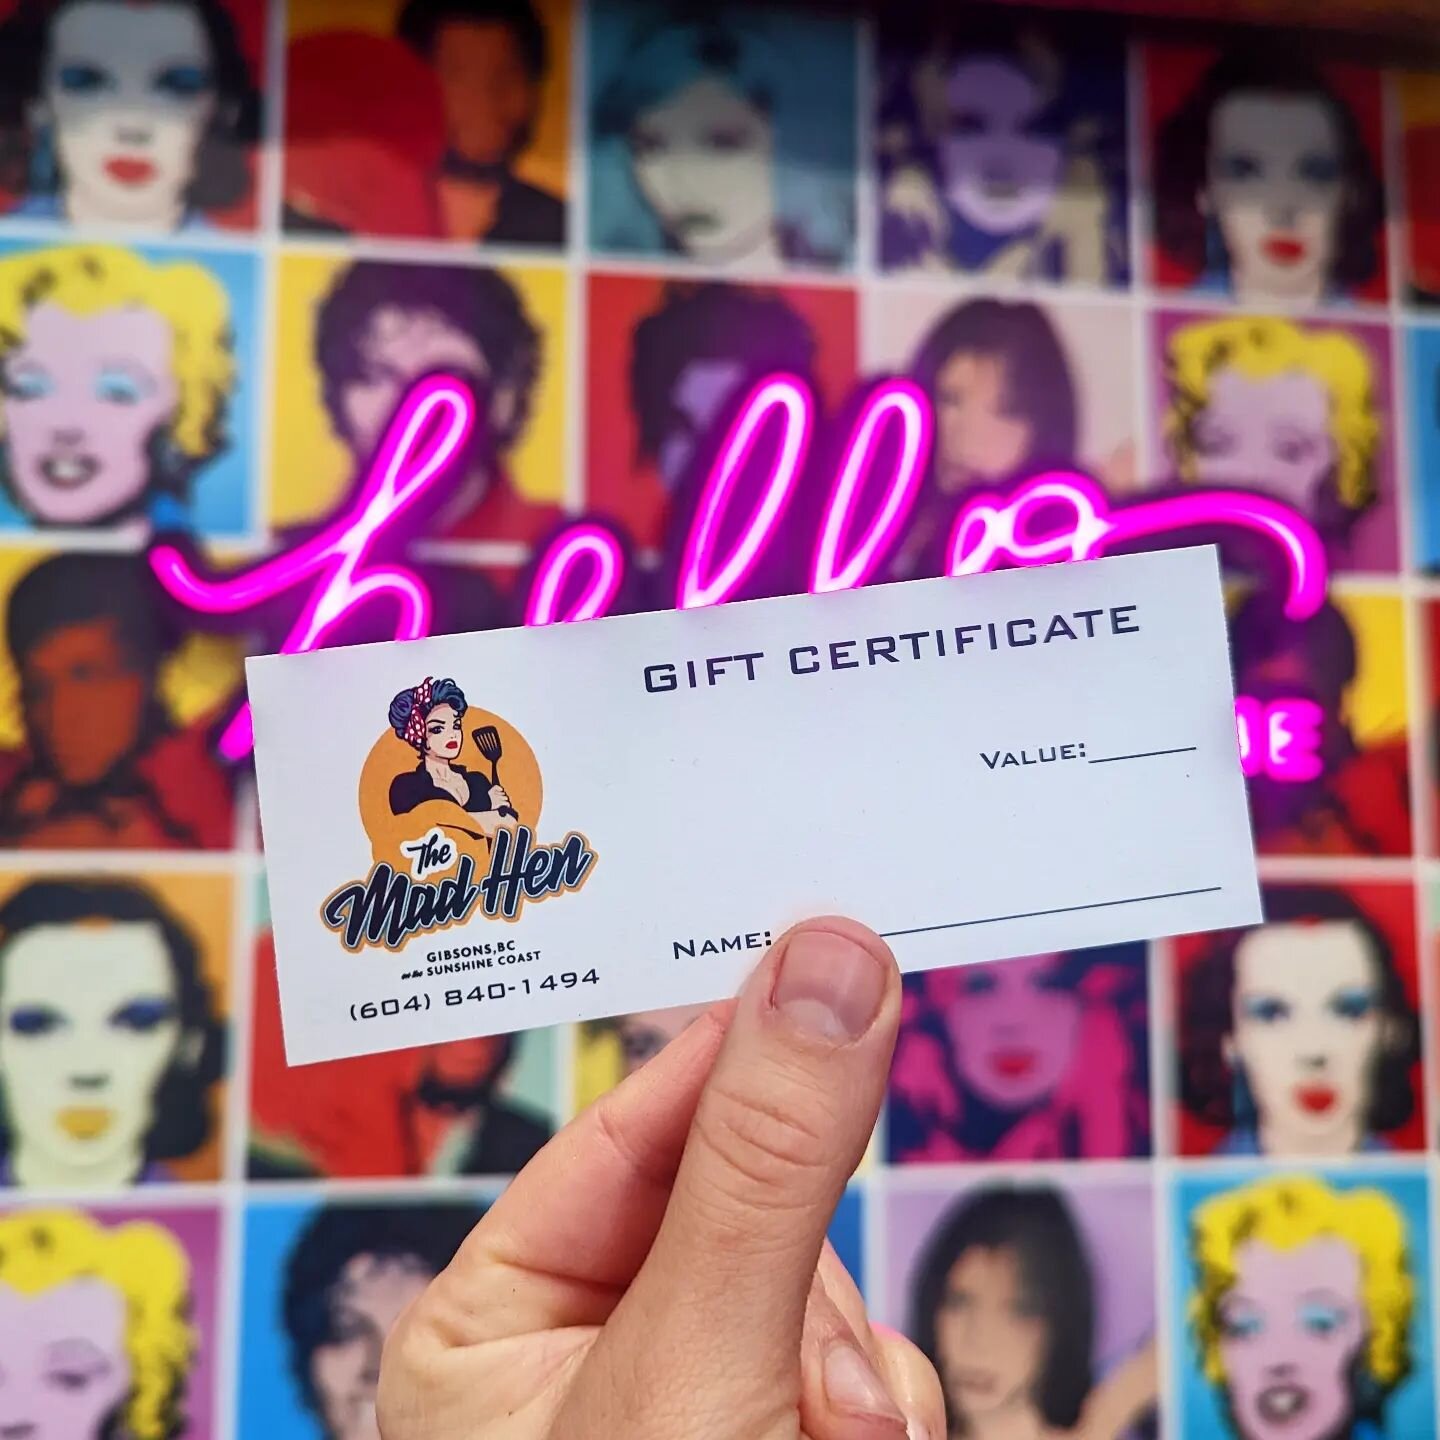 Coasters we heard you! Finally we're more than happy to offer you guys our Gift Cards!! 💝 

#sunshinecoastbc #gibsonsbc #breakfast #brunch #giftcards